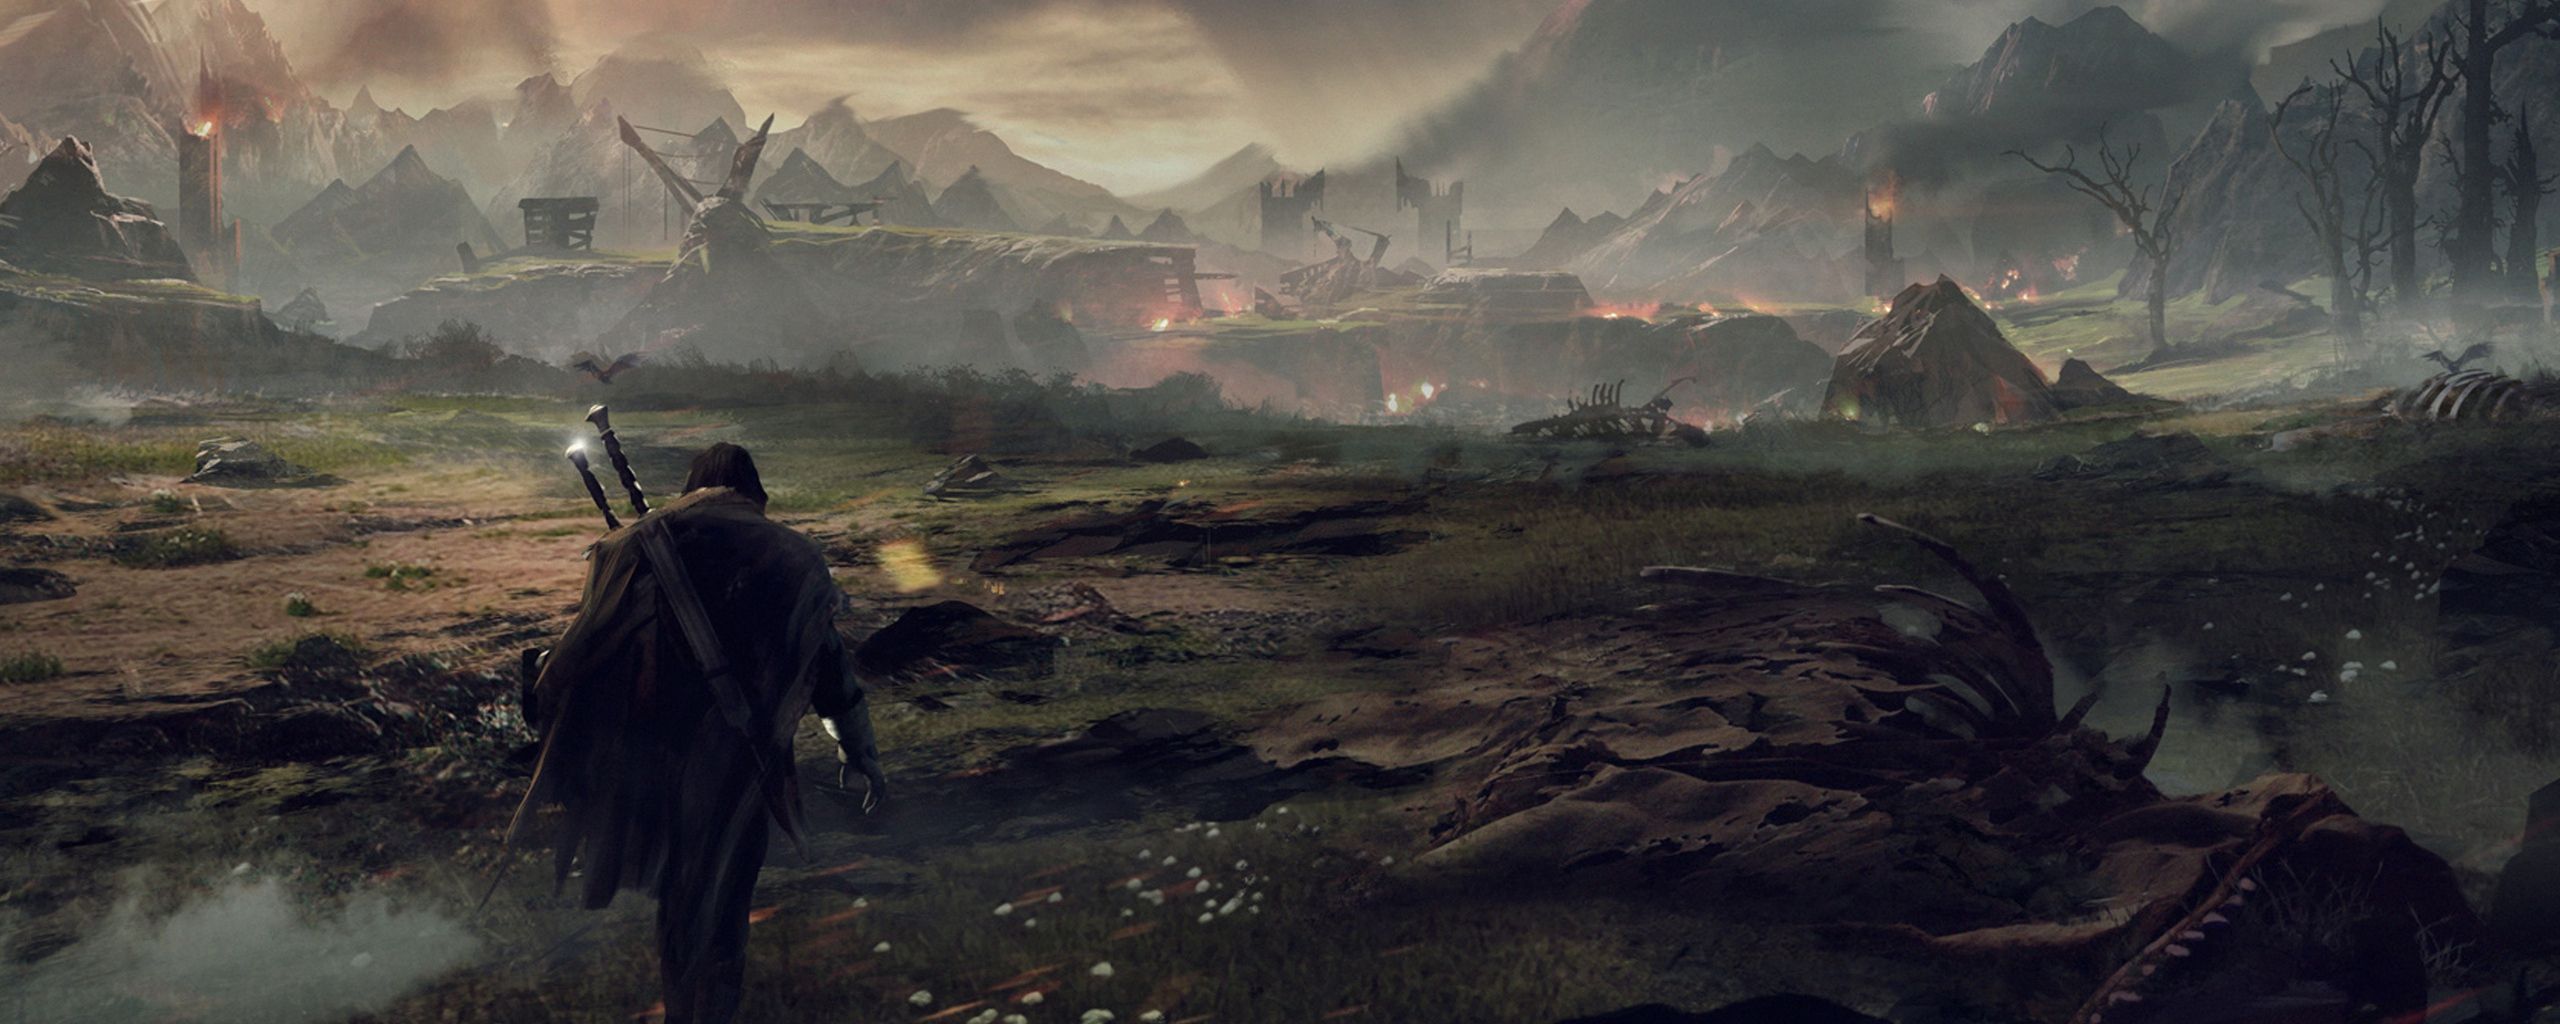 Download Wallpaper 2560x1024 Middle-earth shadow of mordor, The ...